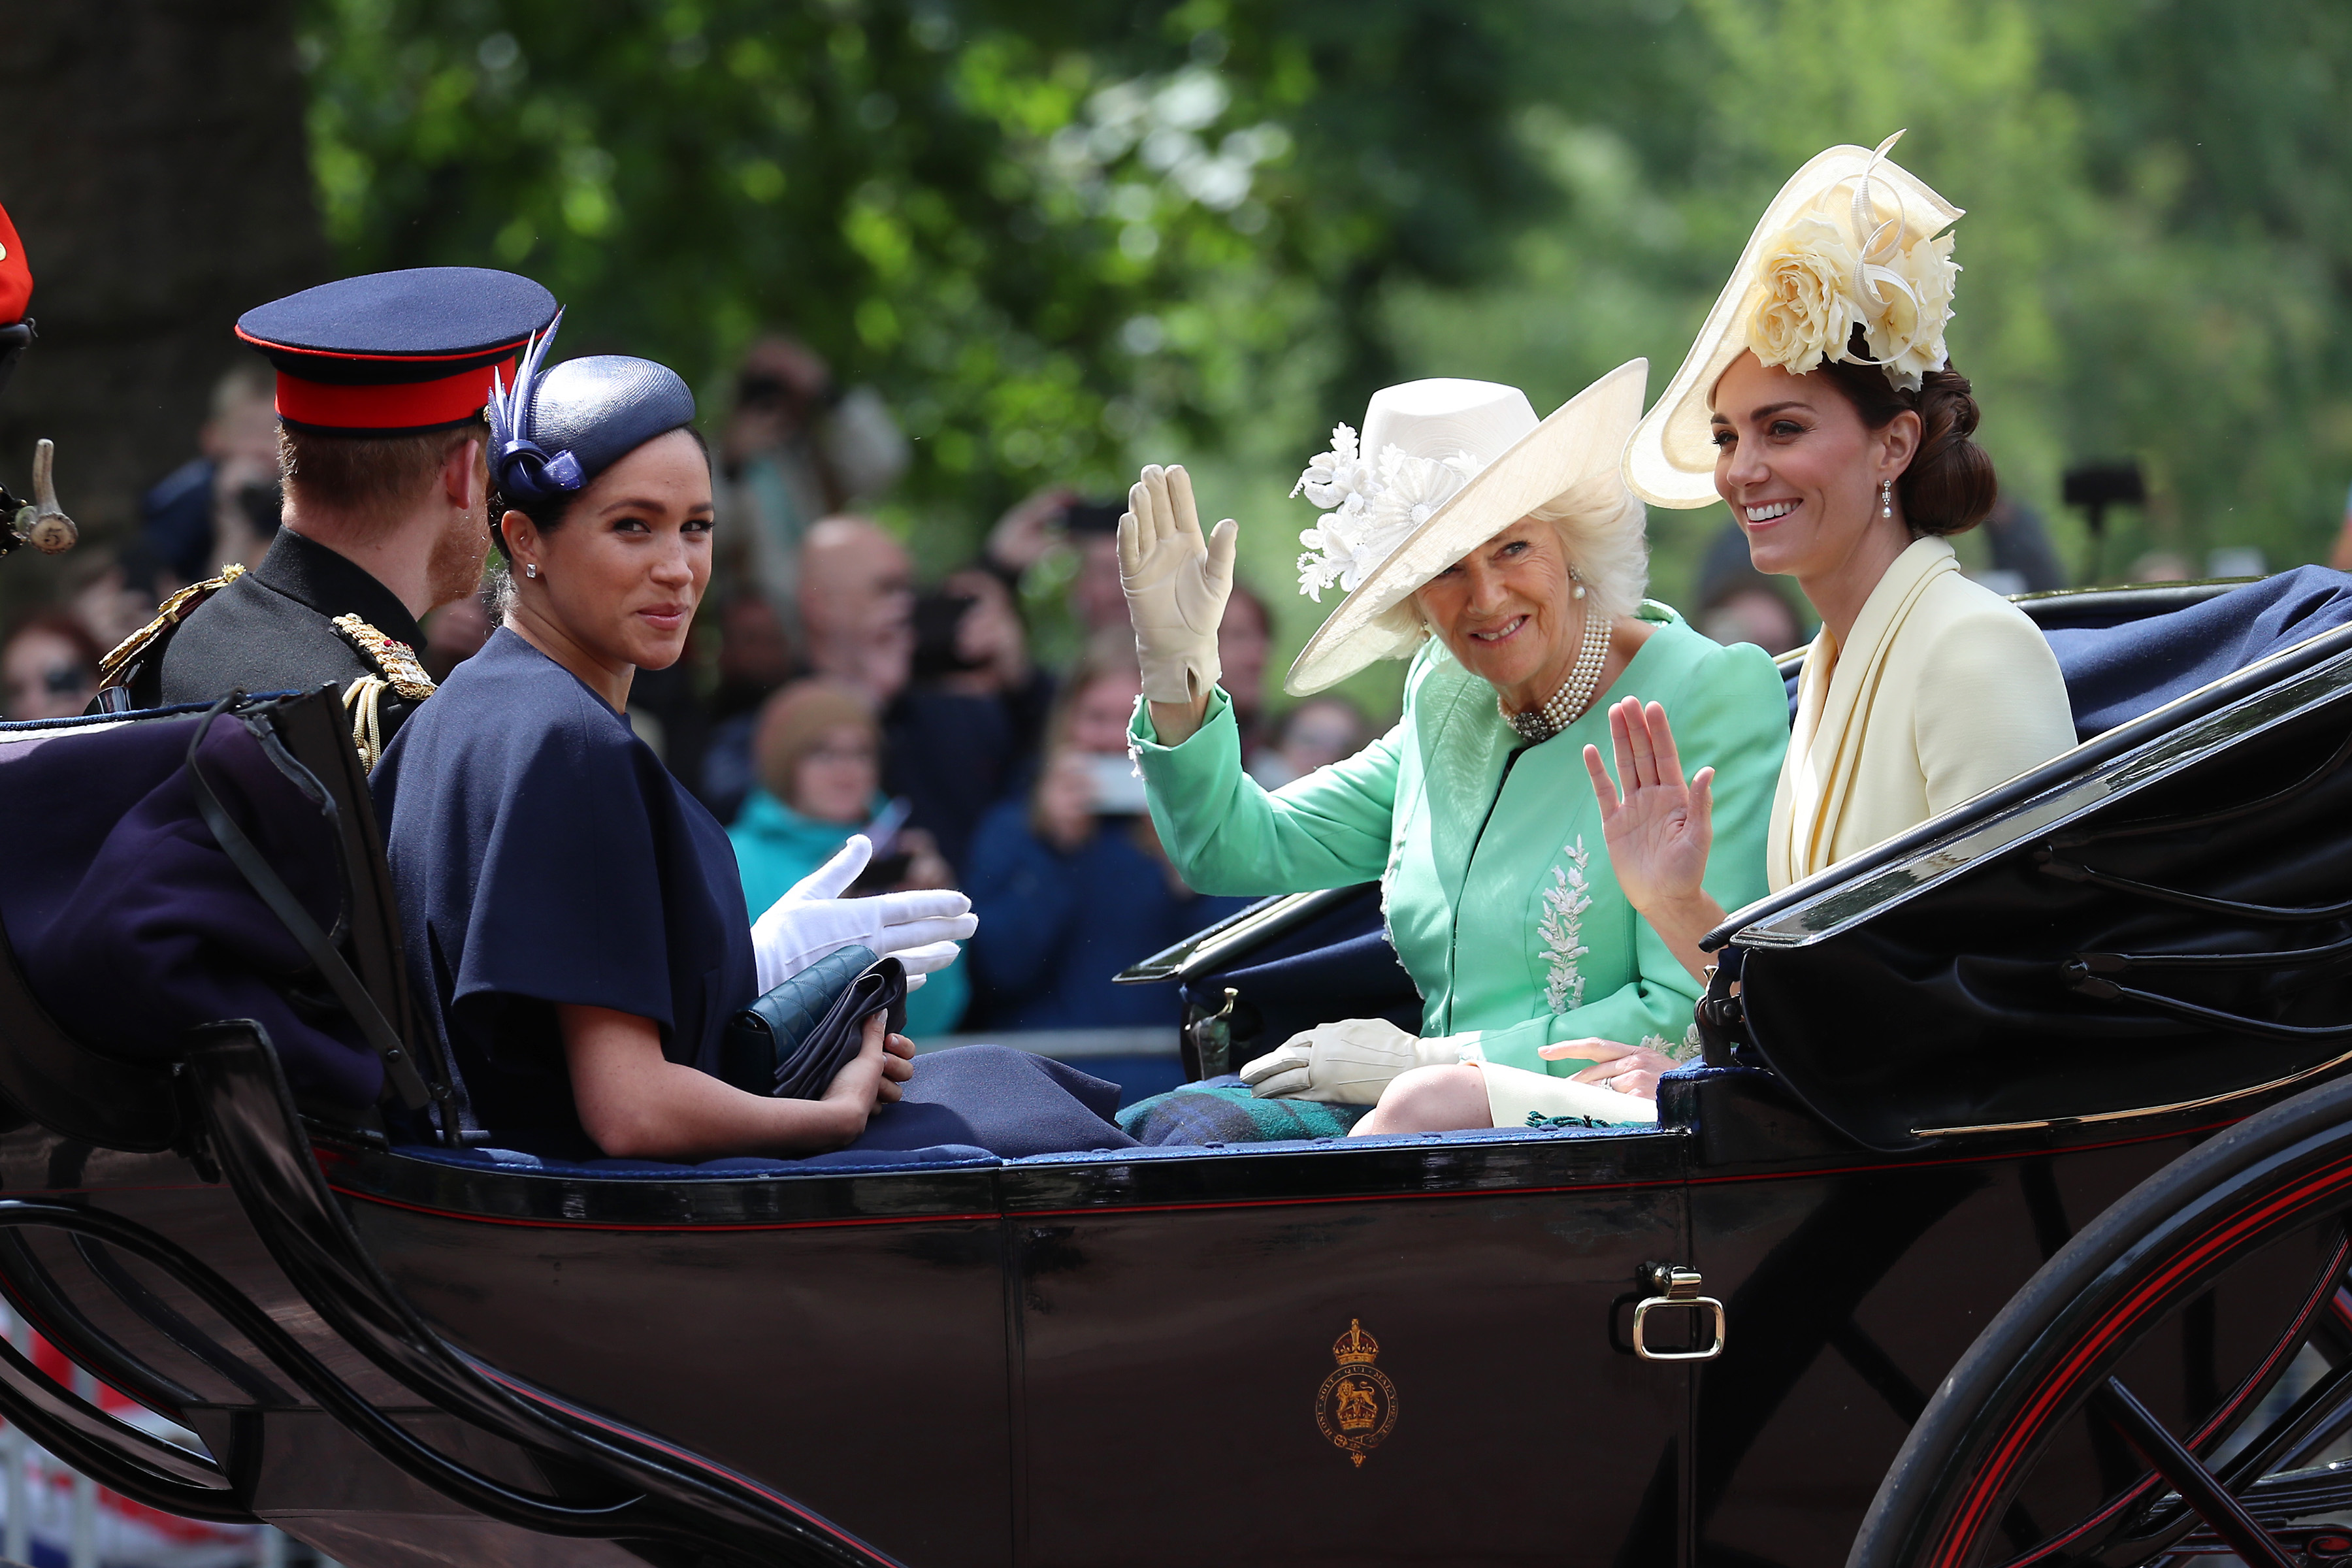 Meghan Markle, Camilla Parker Bowles, and Kate Middleton riding in a carriage during Trooping The Colour 2019